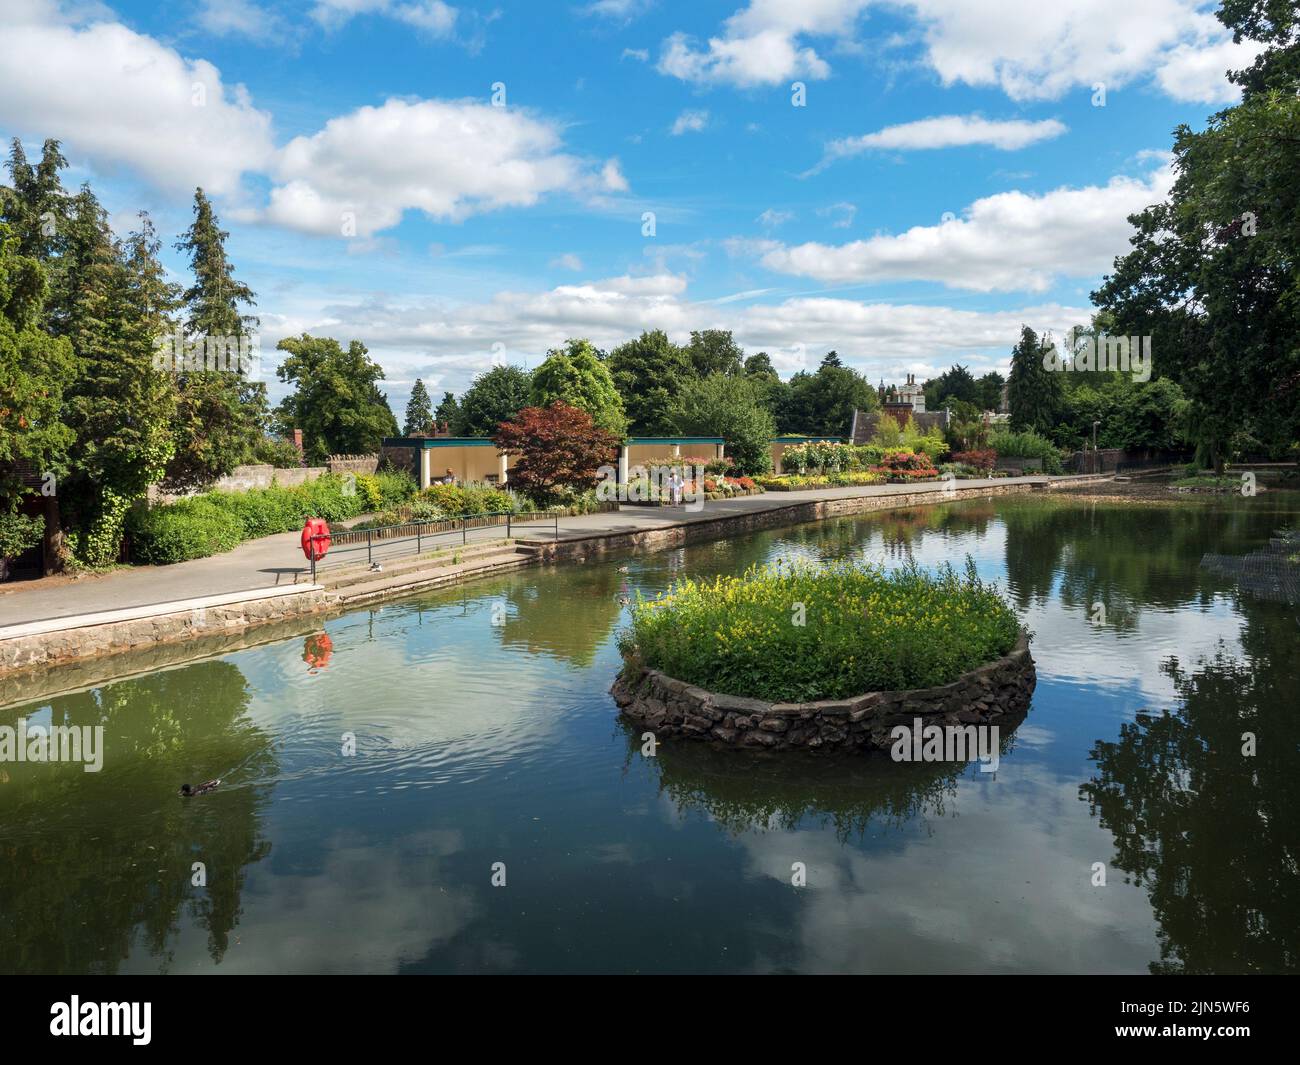 Swan Pool in Priory Park in Great Malvern Worcestershire England Stock Photo